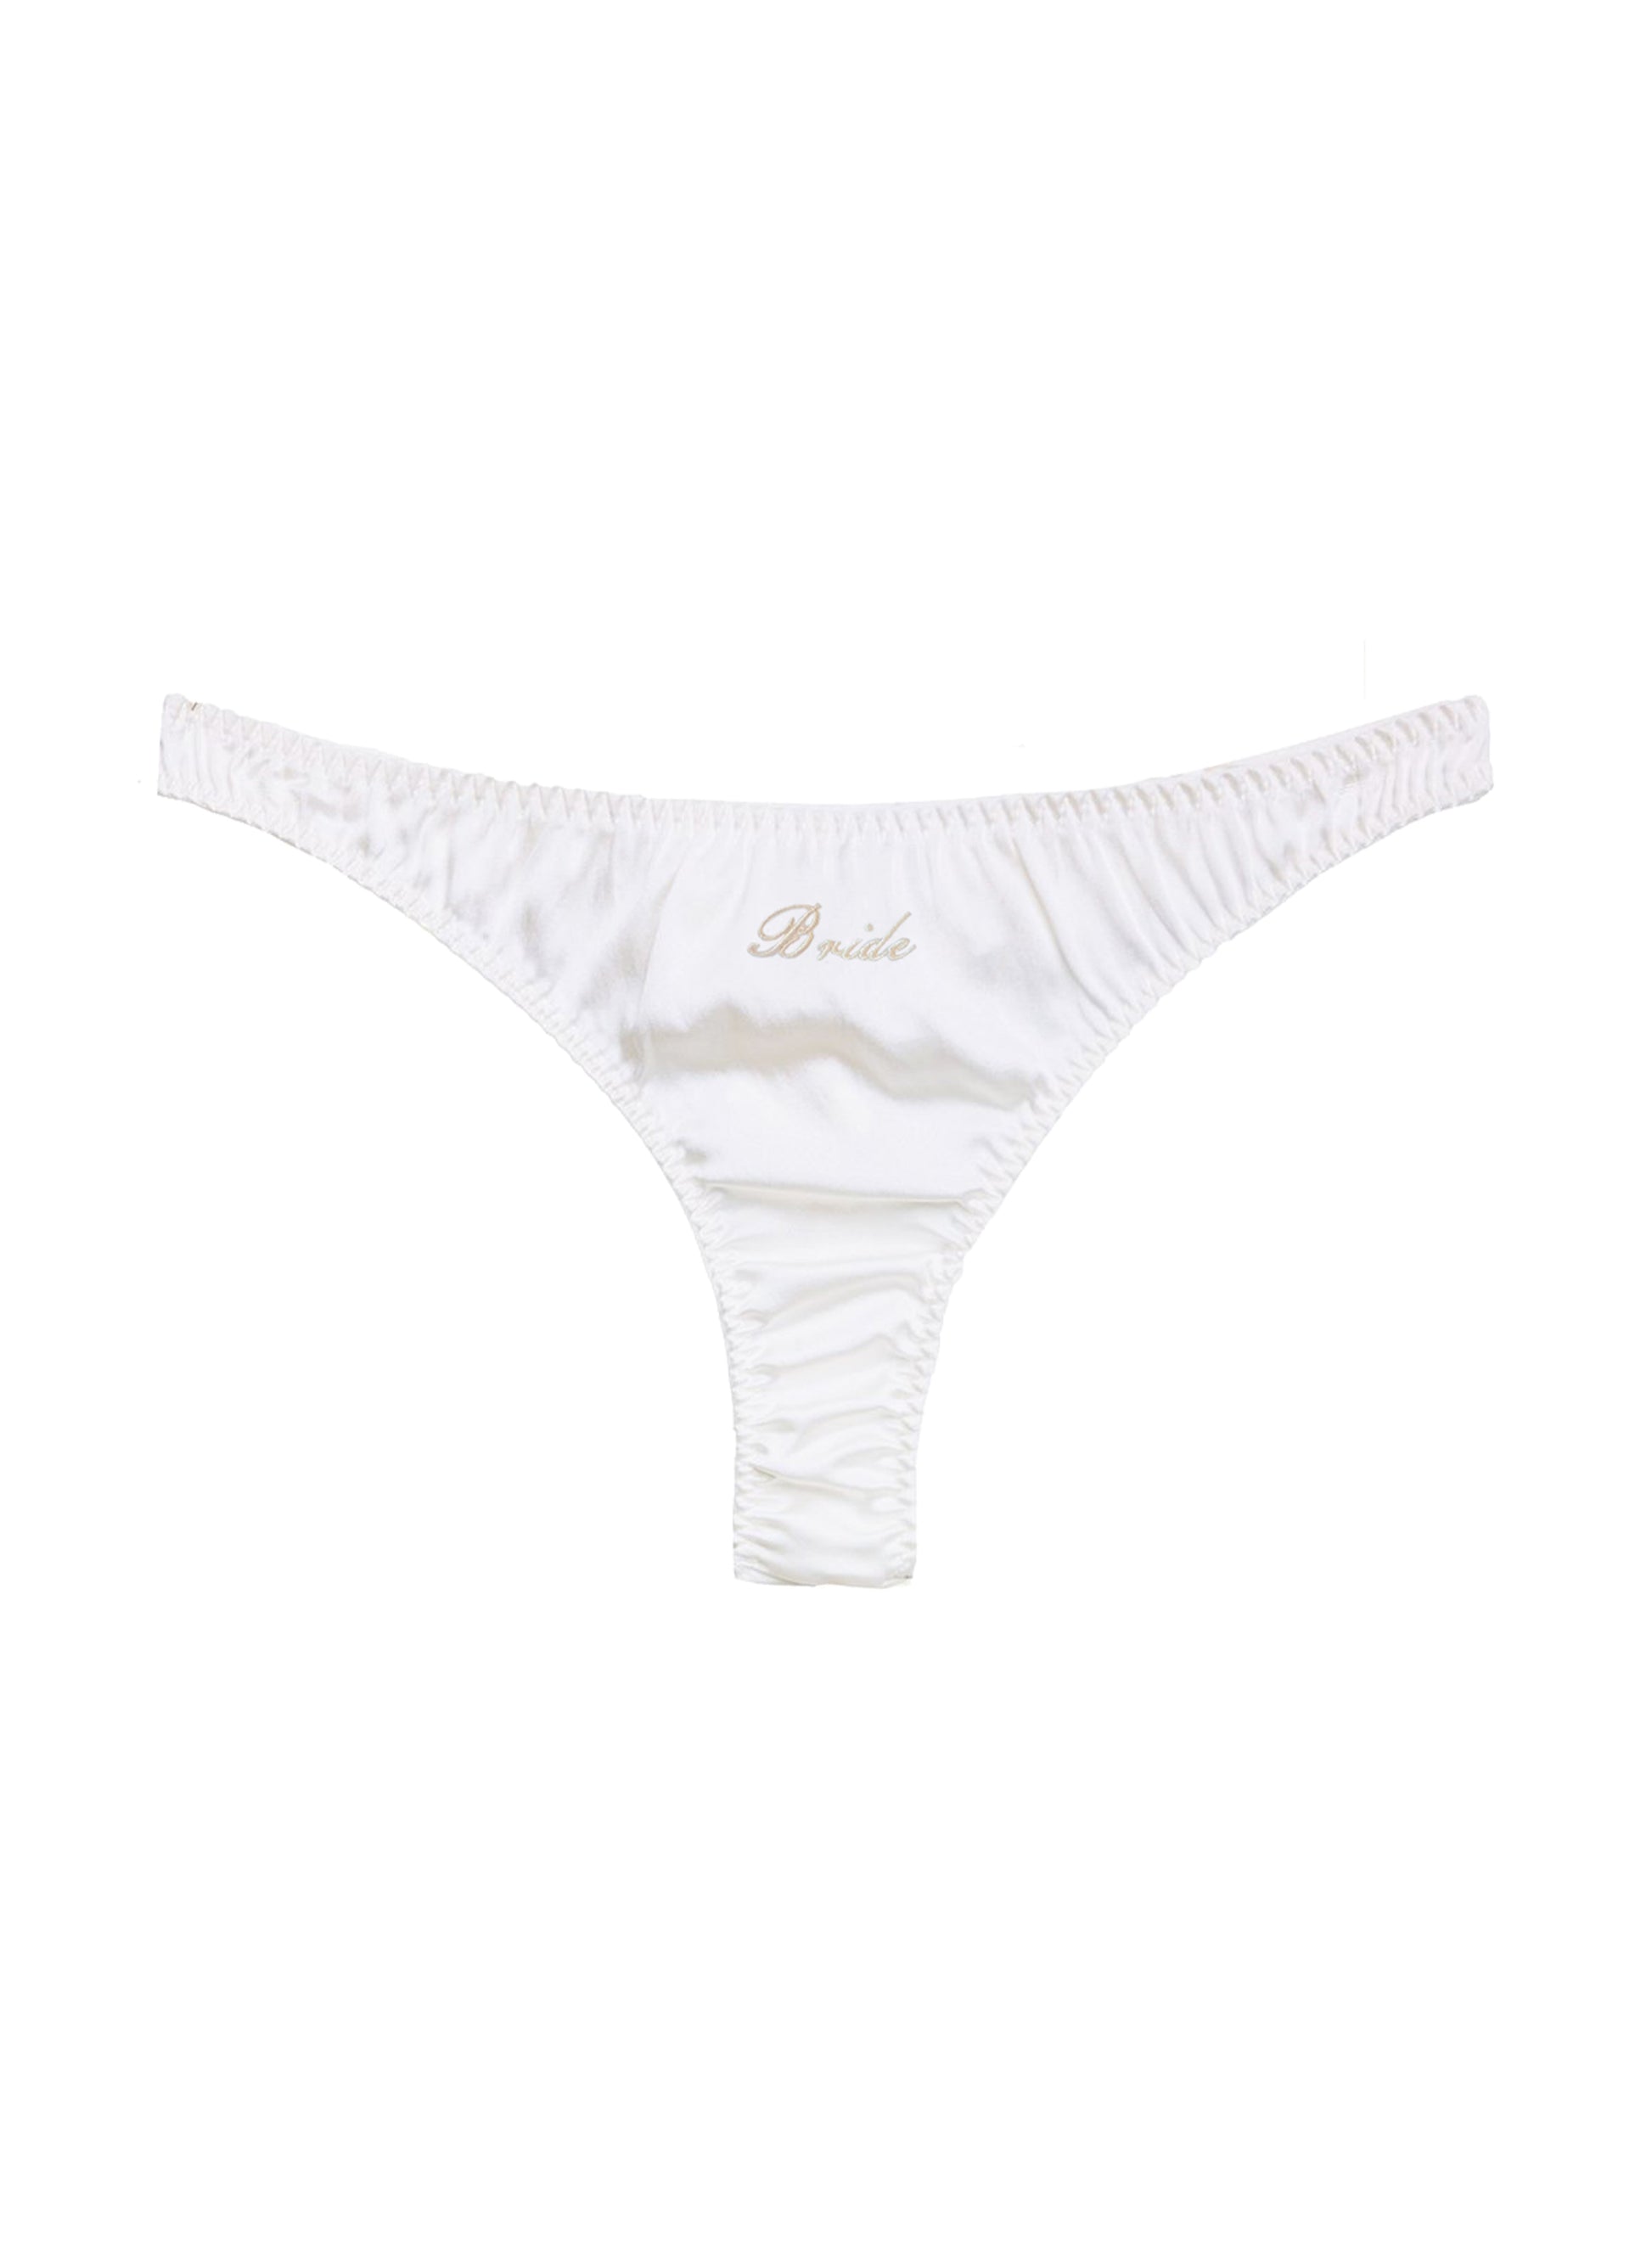 Bridal Luxe Thong